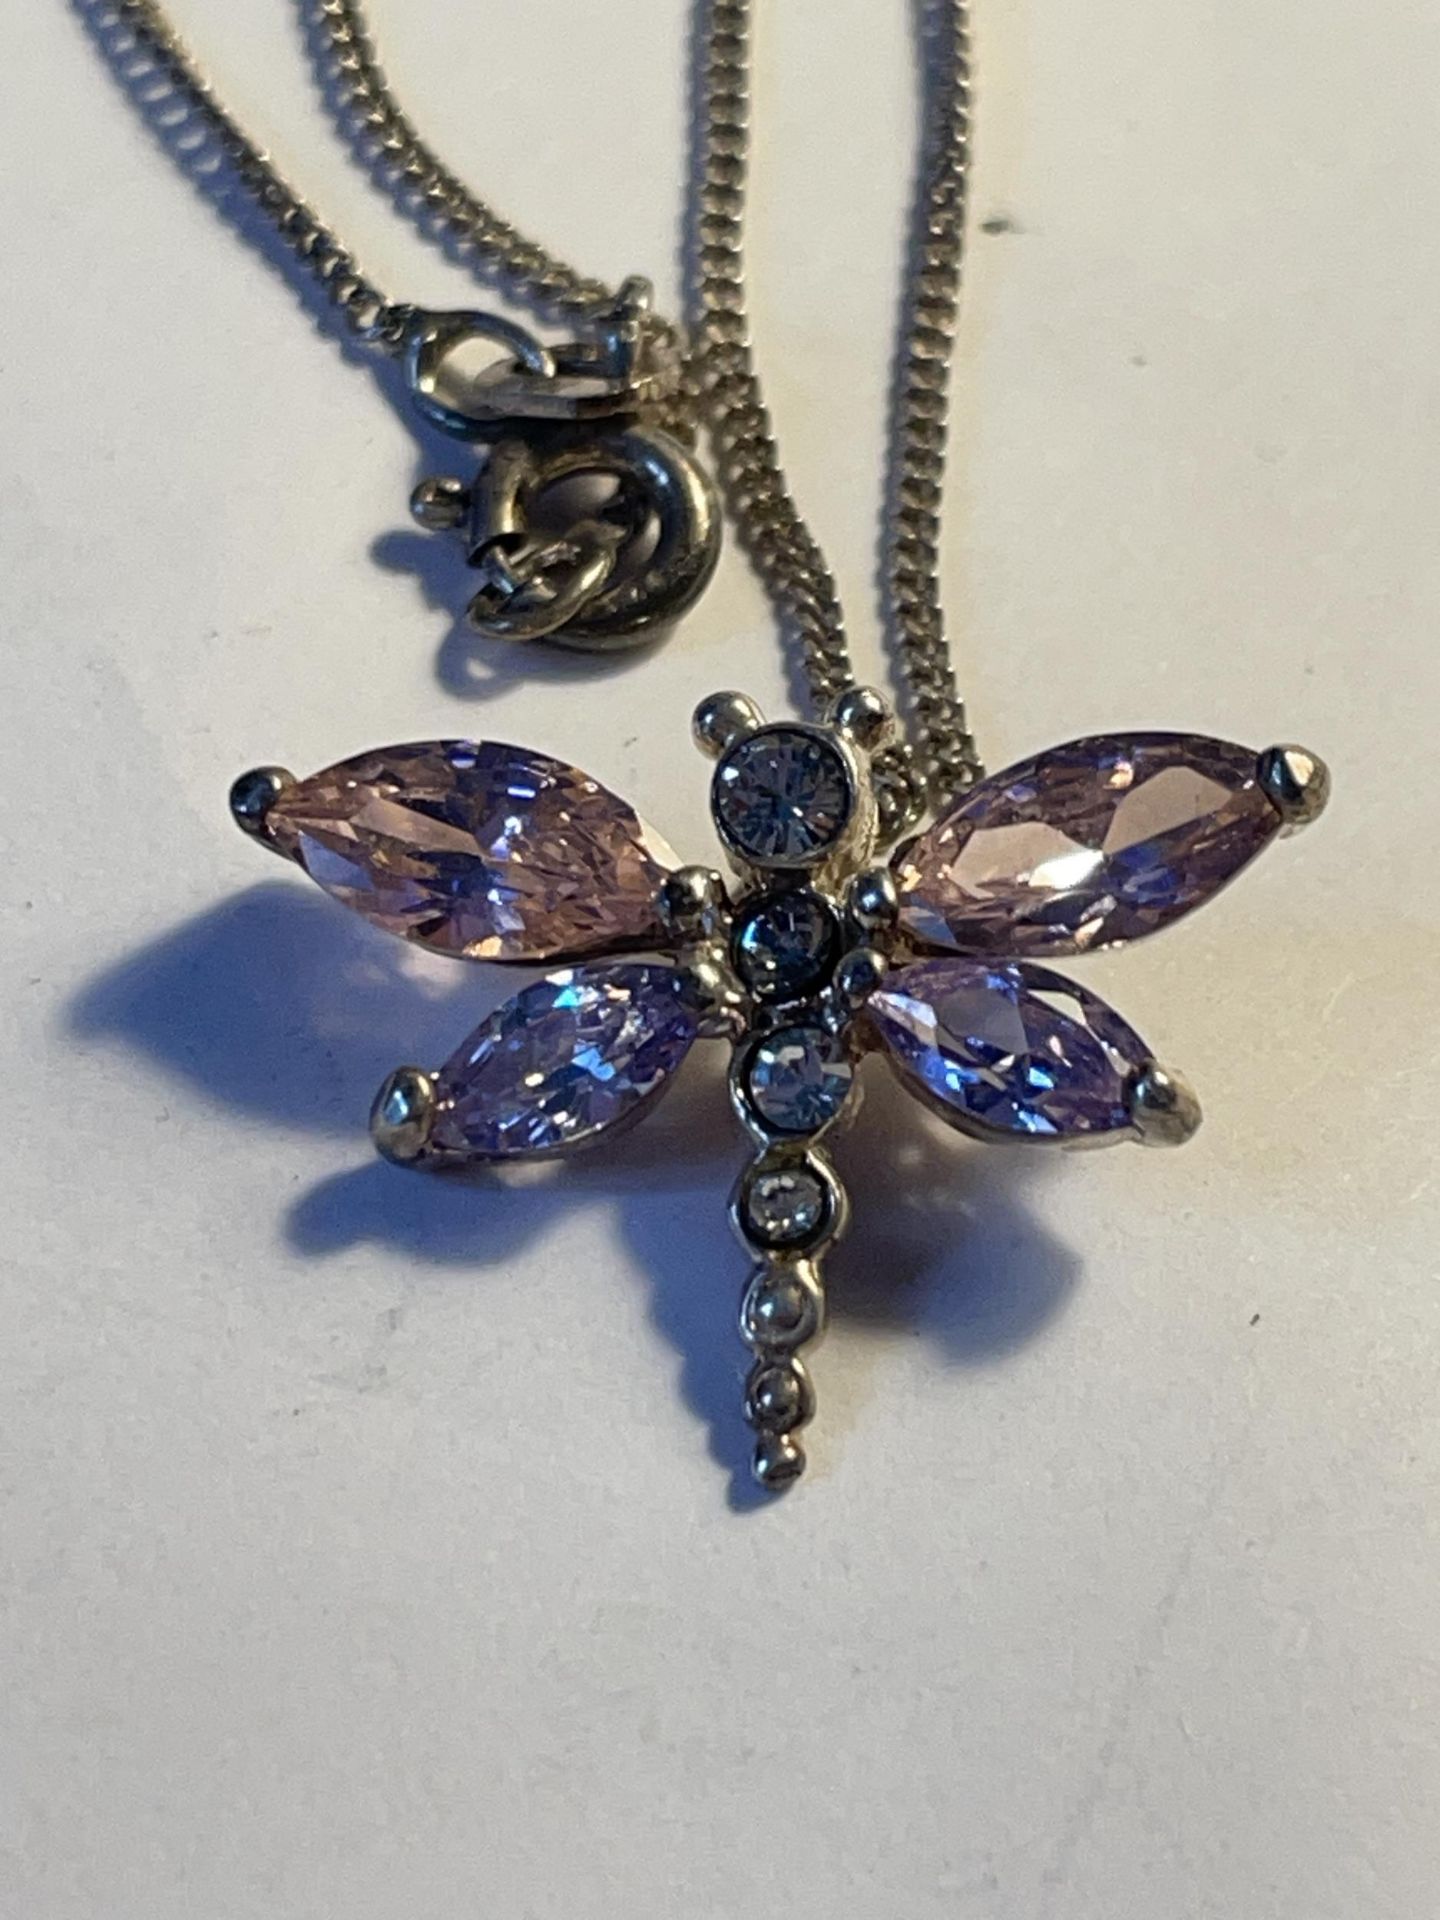 A MARKED 925 SILVER NECKLACE WITH A SILVER AND COLOURED STONE DRAGONFLY PENDANT - Image 2 of 3